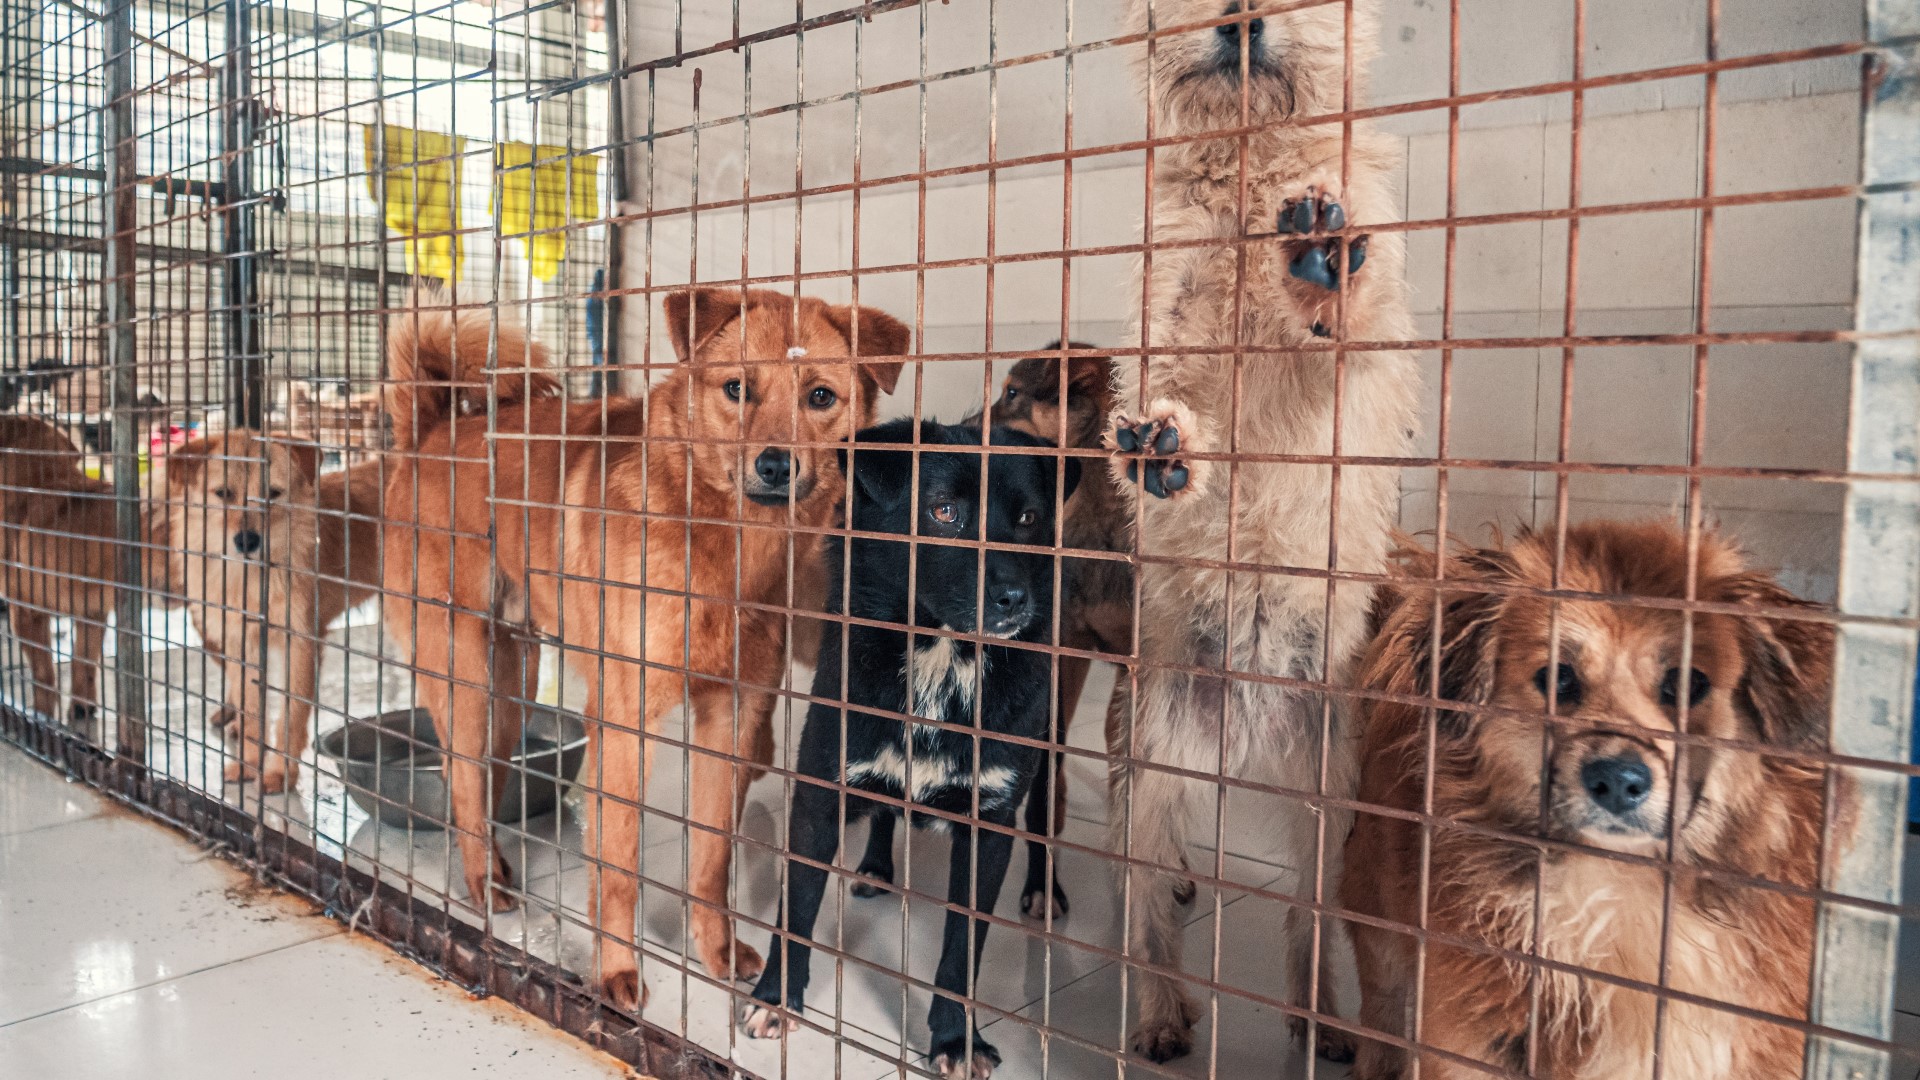 Local nonprofit, Lifeline Animal Project was forced to euthanize multiple dogs due to overcrowding. The nonprofit urges people to foster, adopt or volunteer.